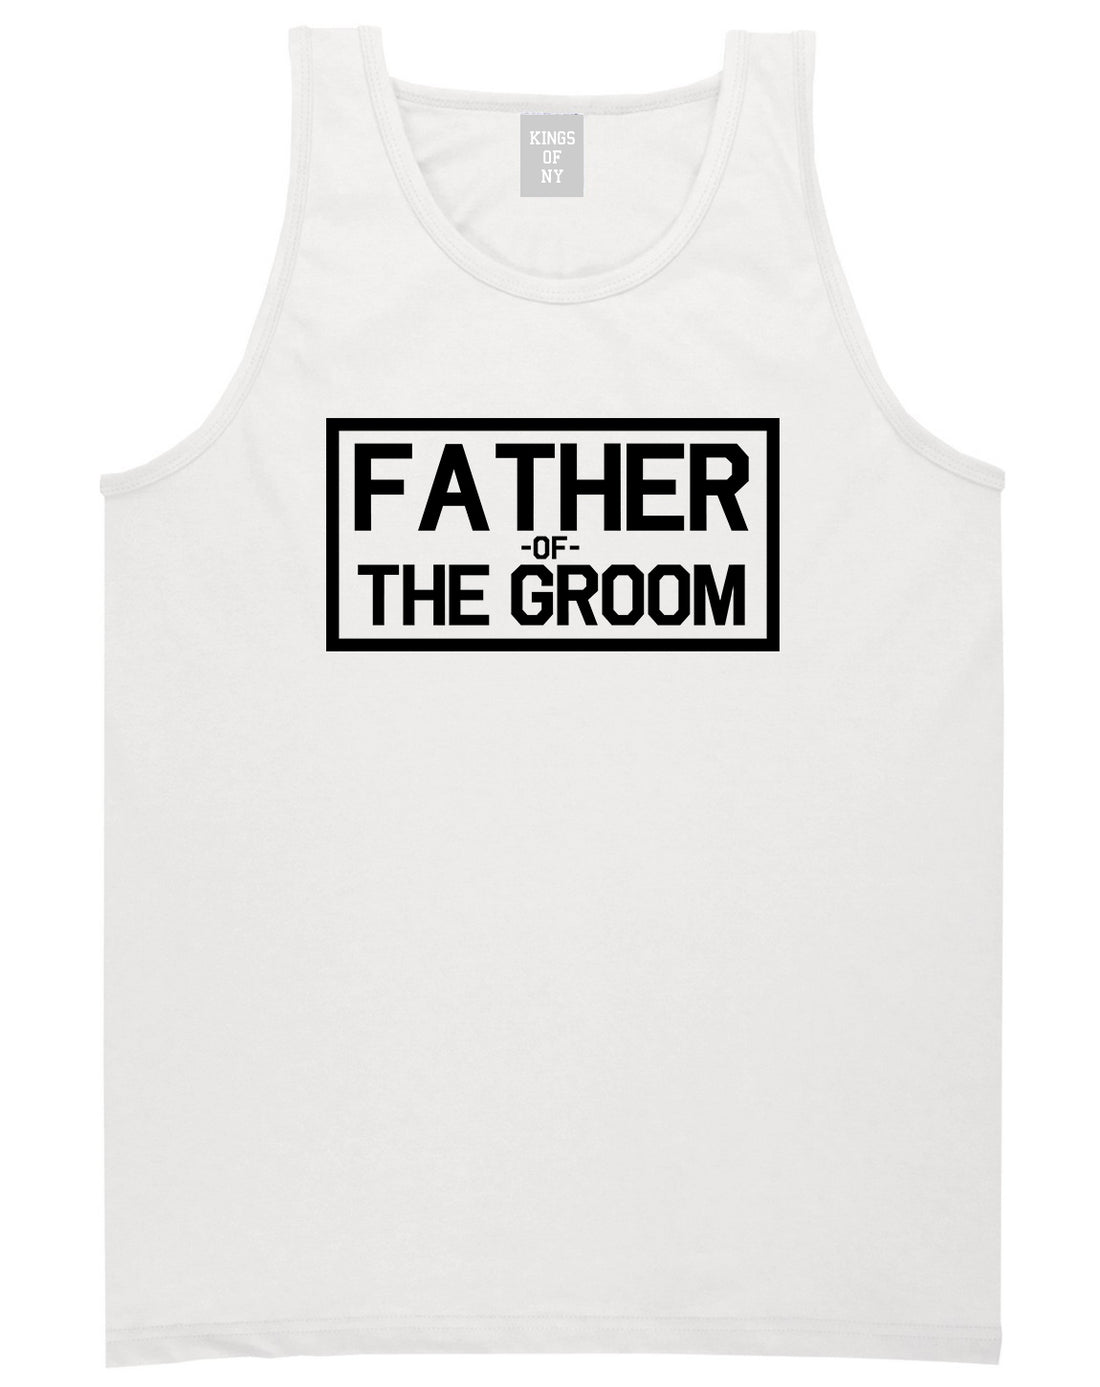 Father_Of_The_Groom Mens White Tank Top Shirt by Kings Of NY